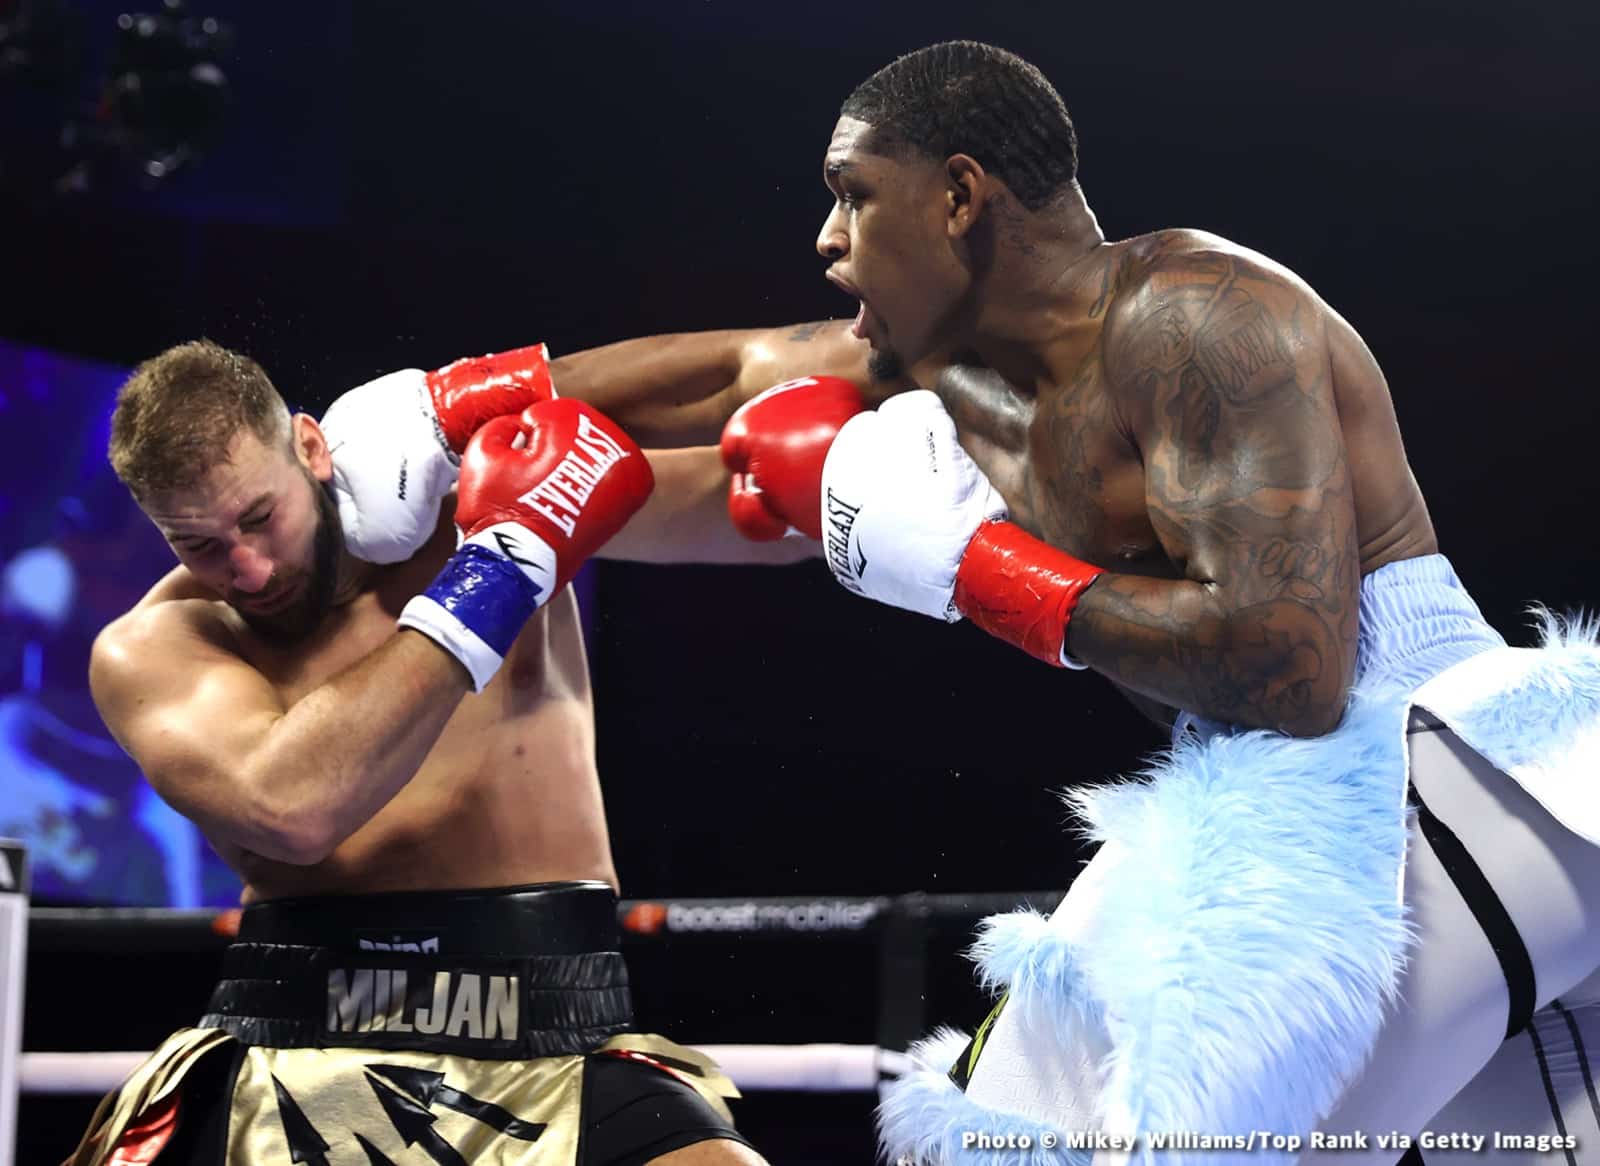 Image: Boxing Results: Jose Pedraza & Richard Commey Draw!